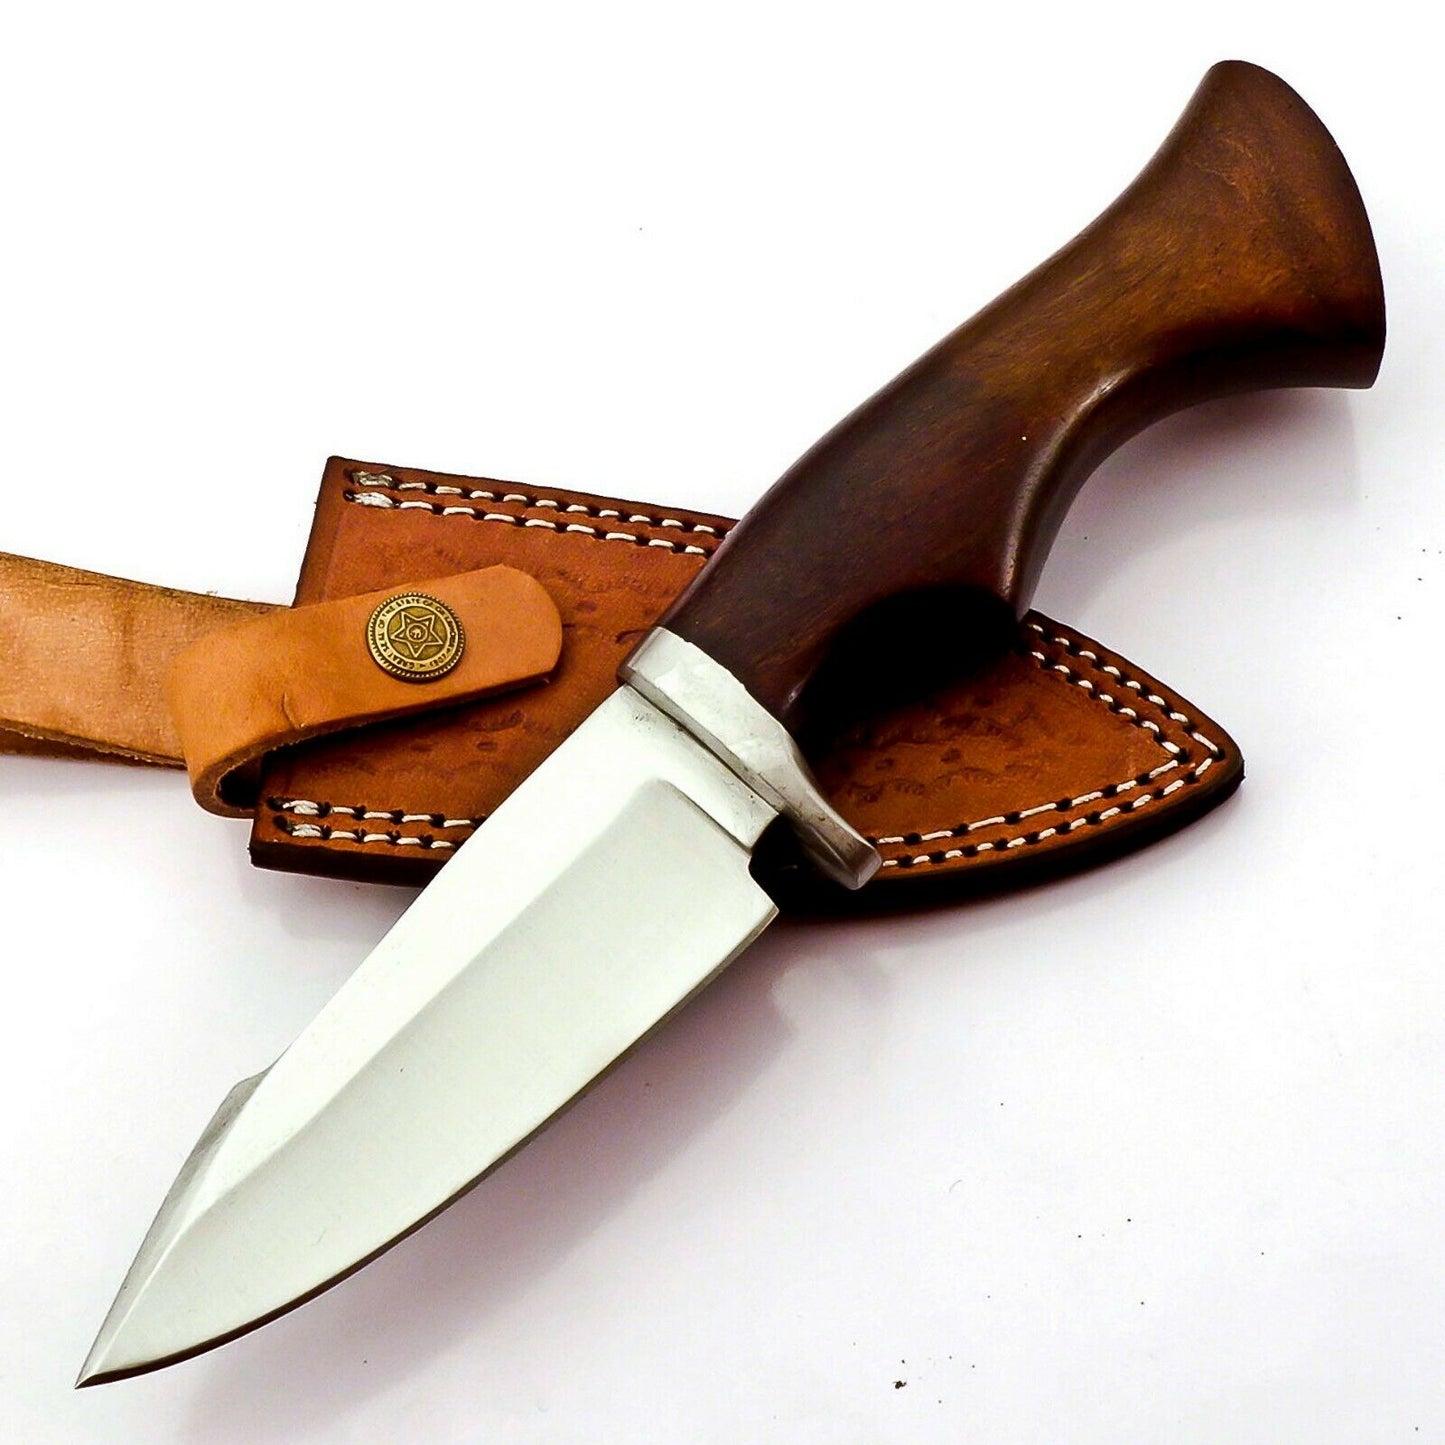 Handmade 440c Stainless Steel Bowie knife set with leather sheath 3pcs Limited